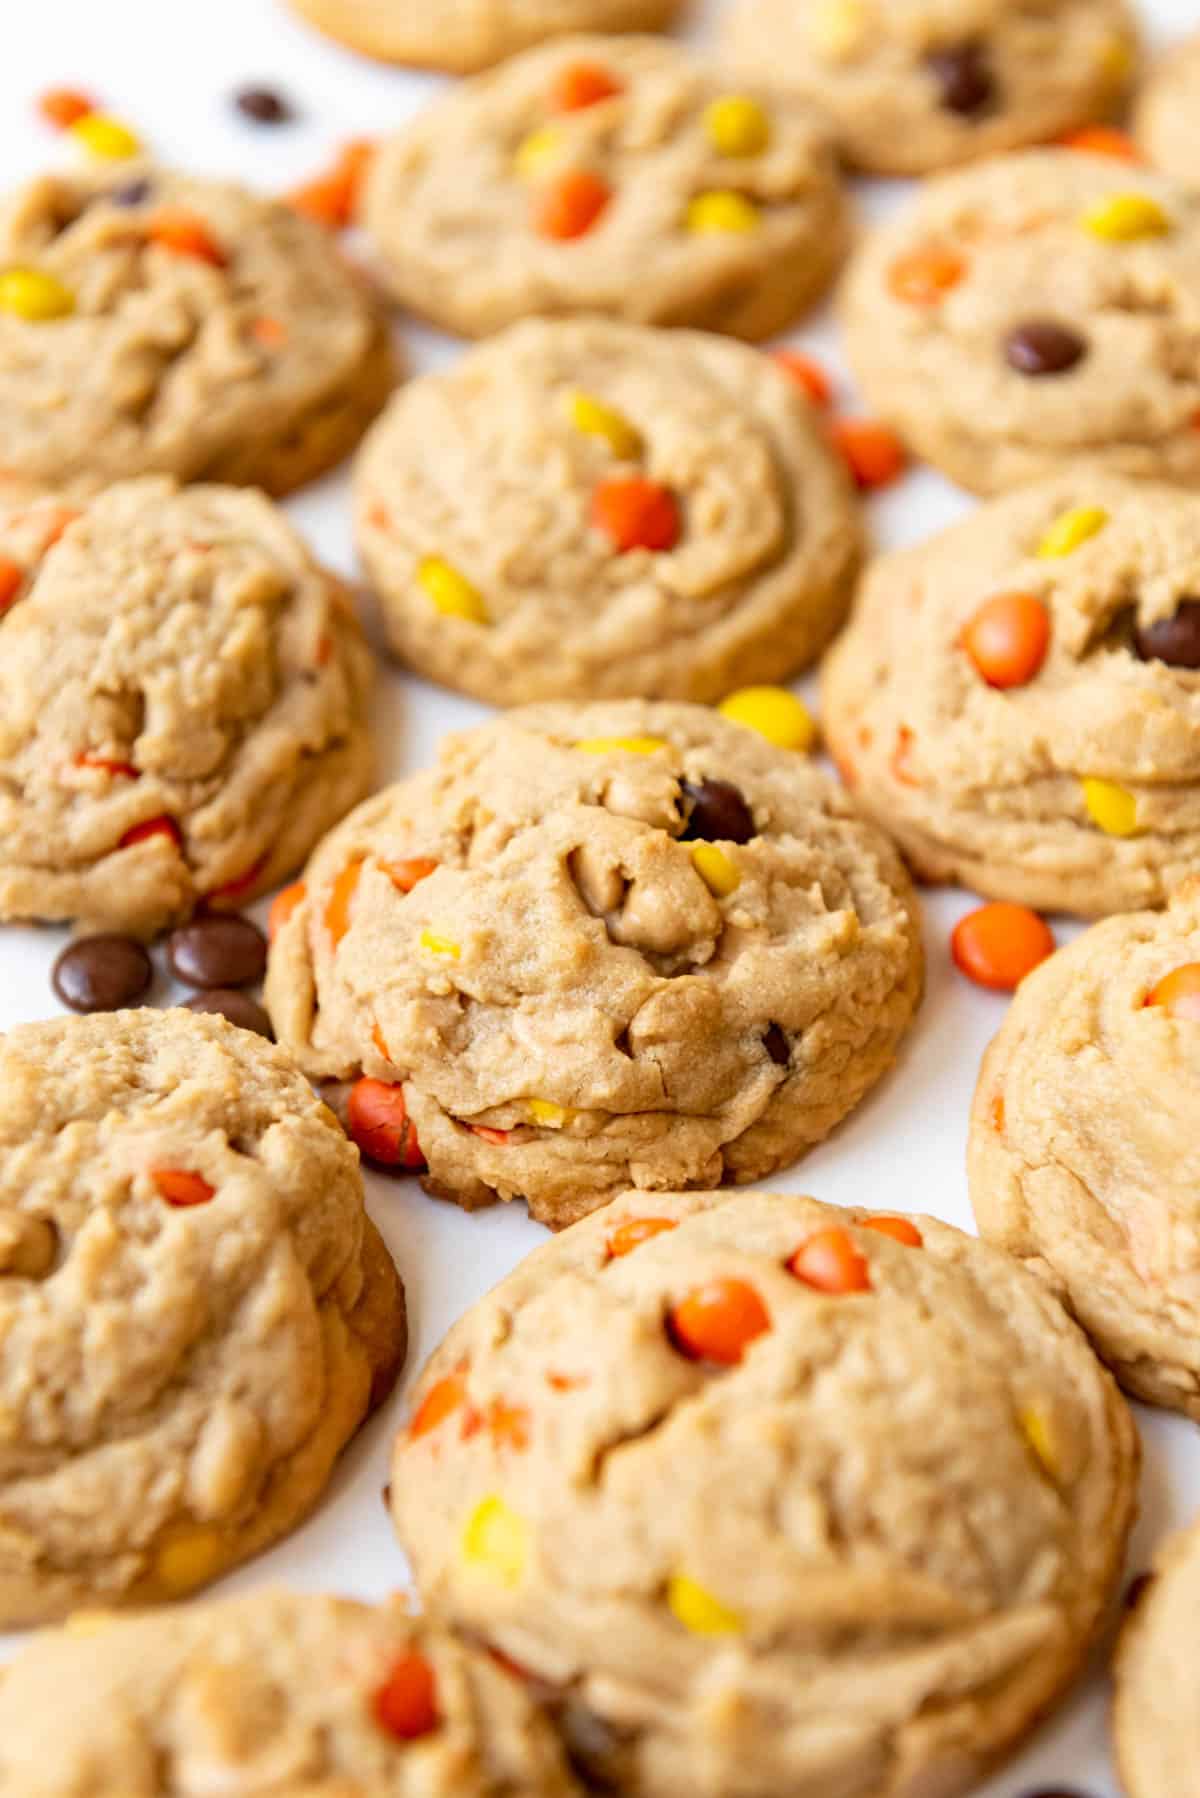 Reese's pieces cookies arranged close together with Reese's Pieces candy nearby.